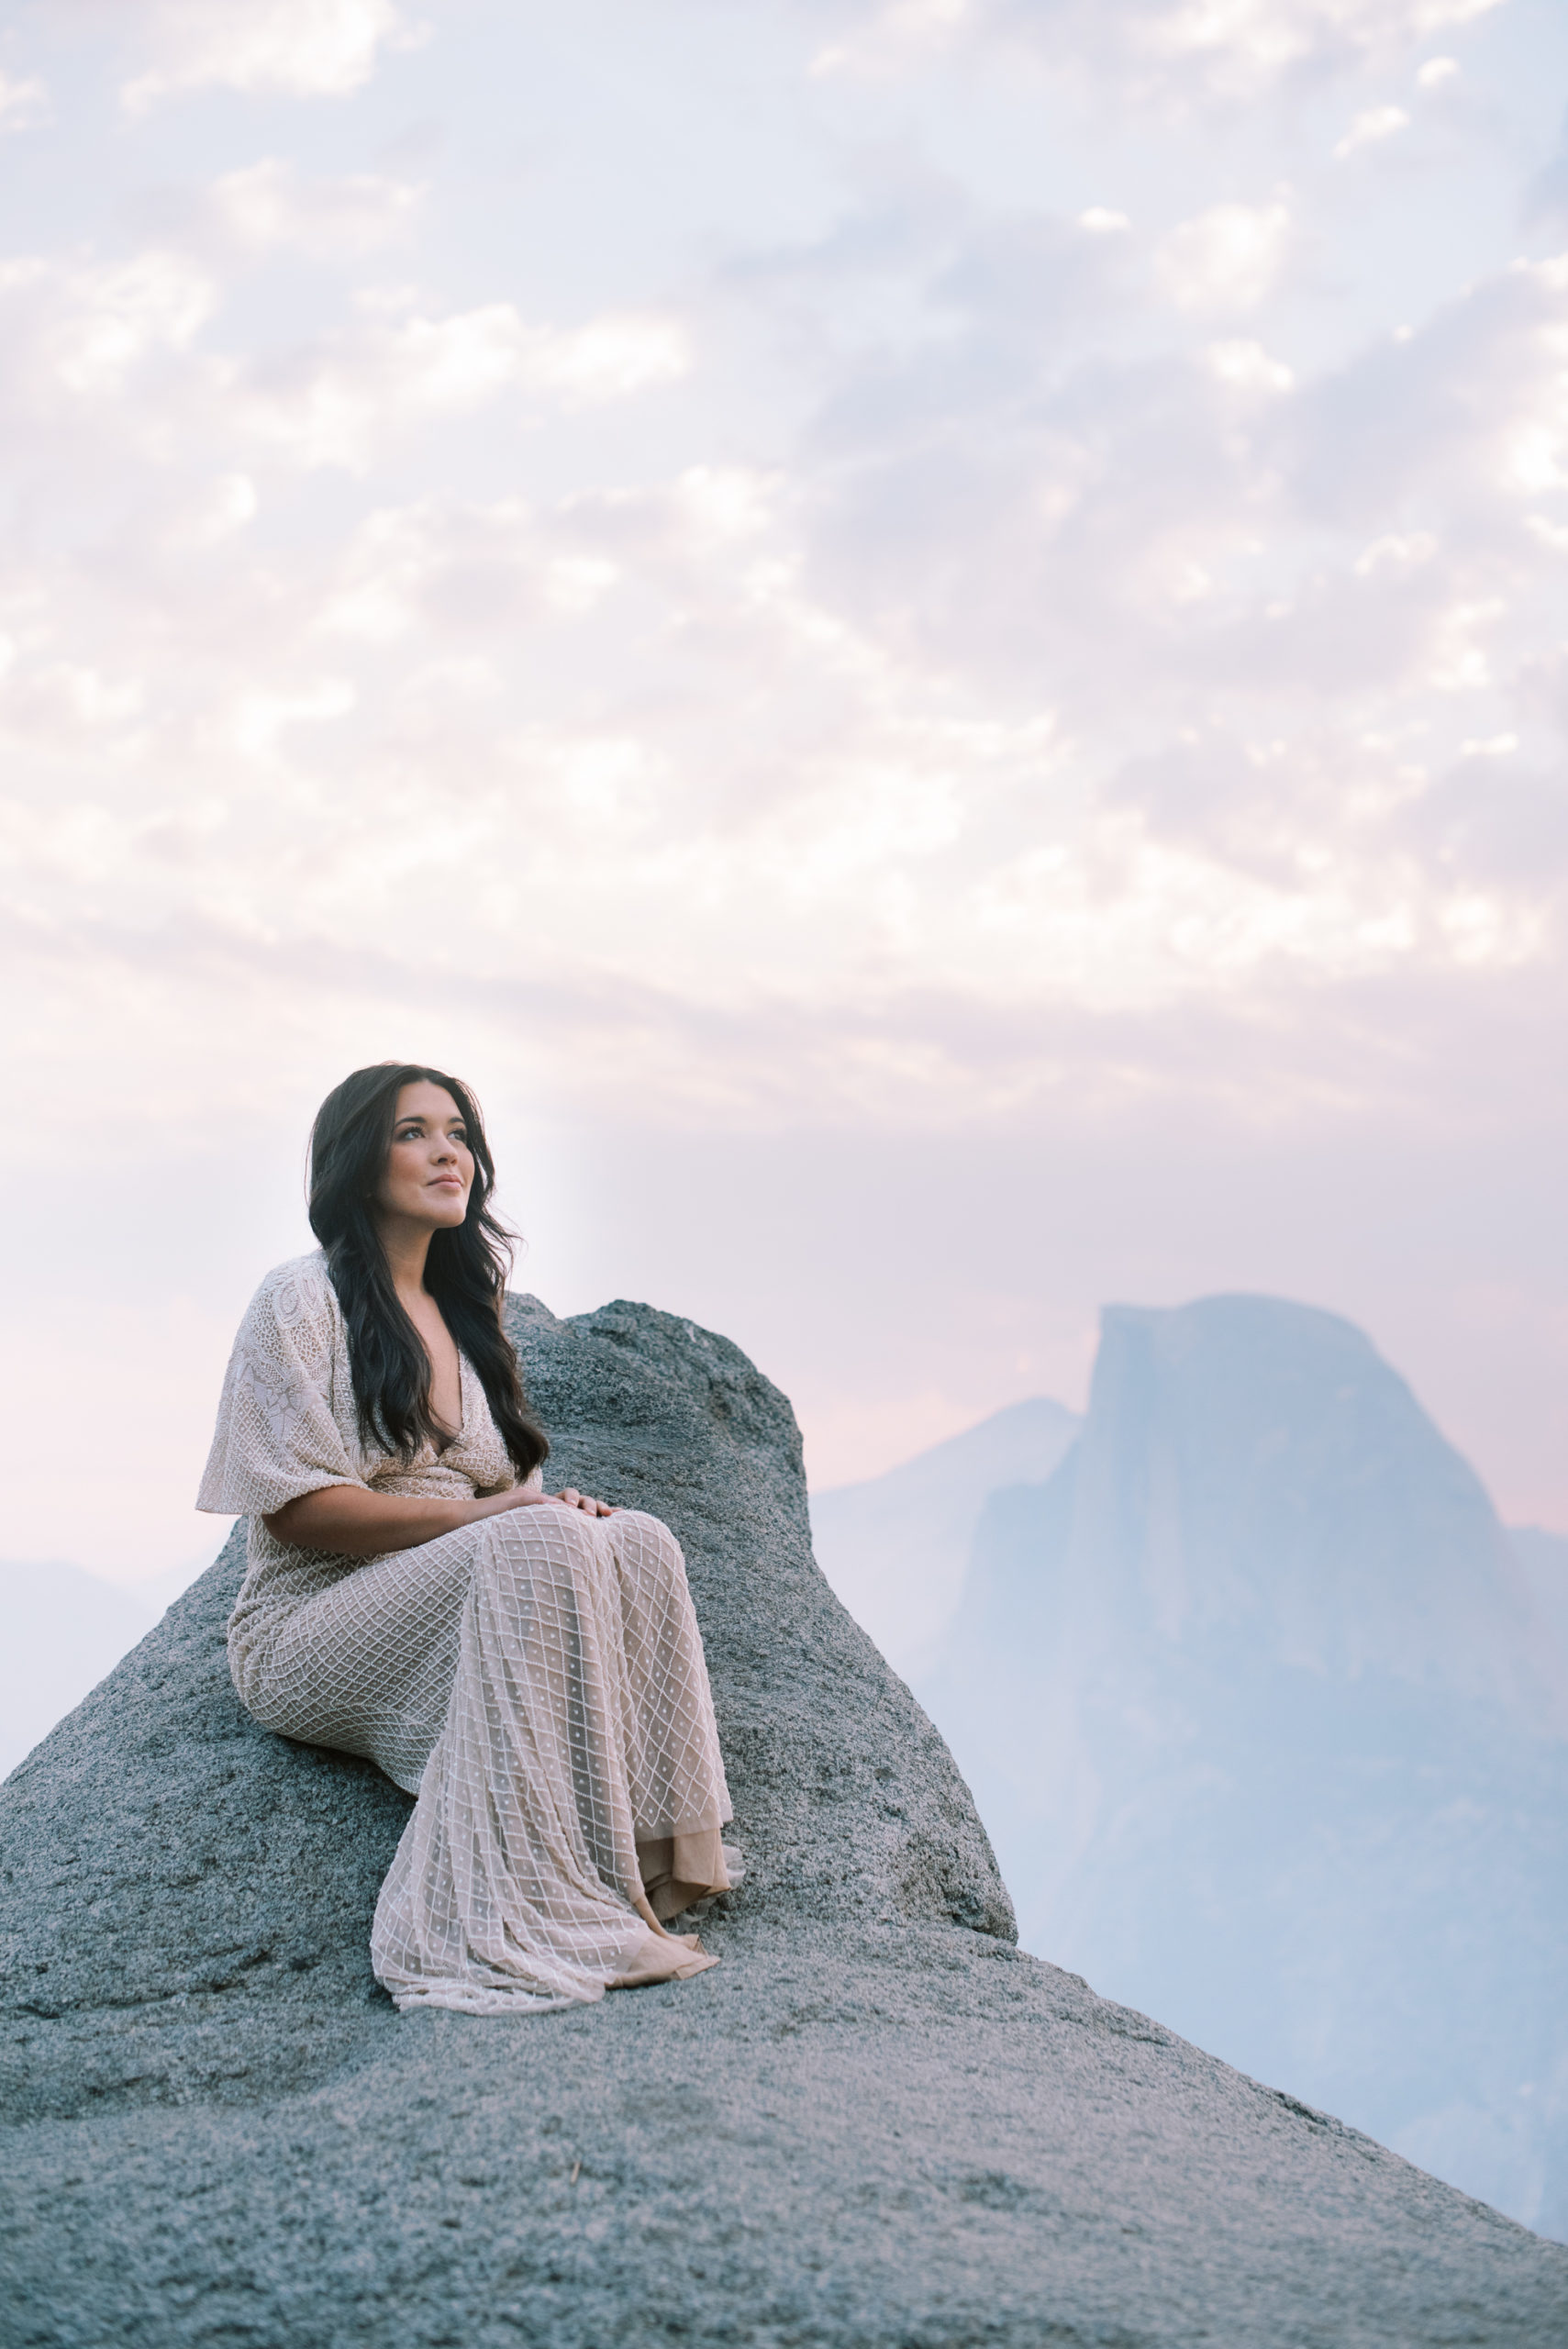 Bridal Session at Yosemite National Park - Bride sitting on a rock at Glacier Point with Half Dome in the background